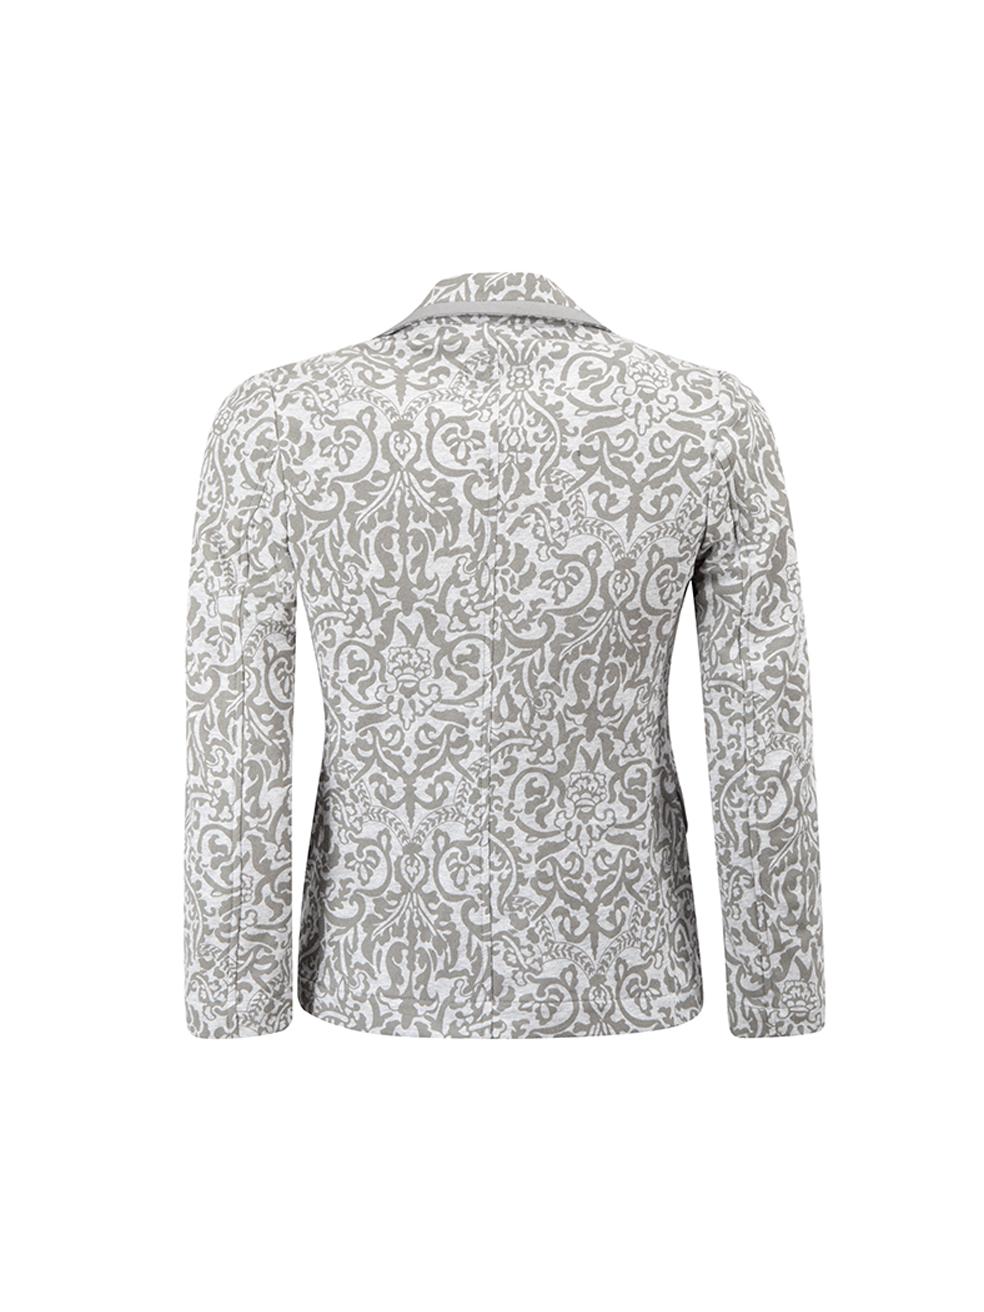 Roberto Cavalli Women's Grey Patterned Blazer Style Jacket In Good Condition In London, GB